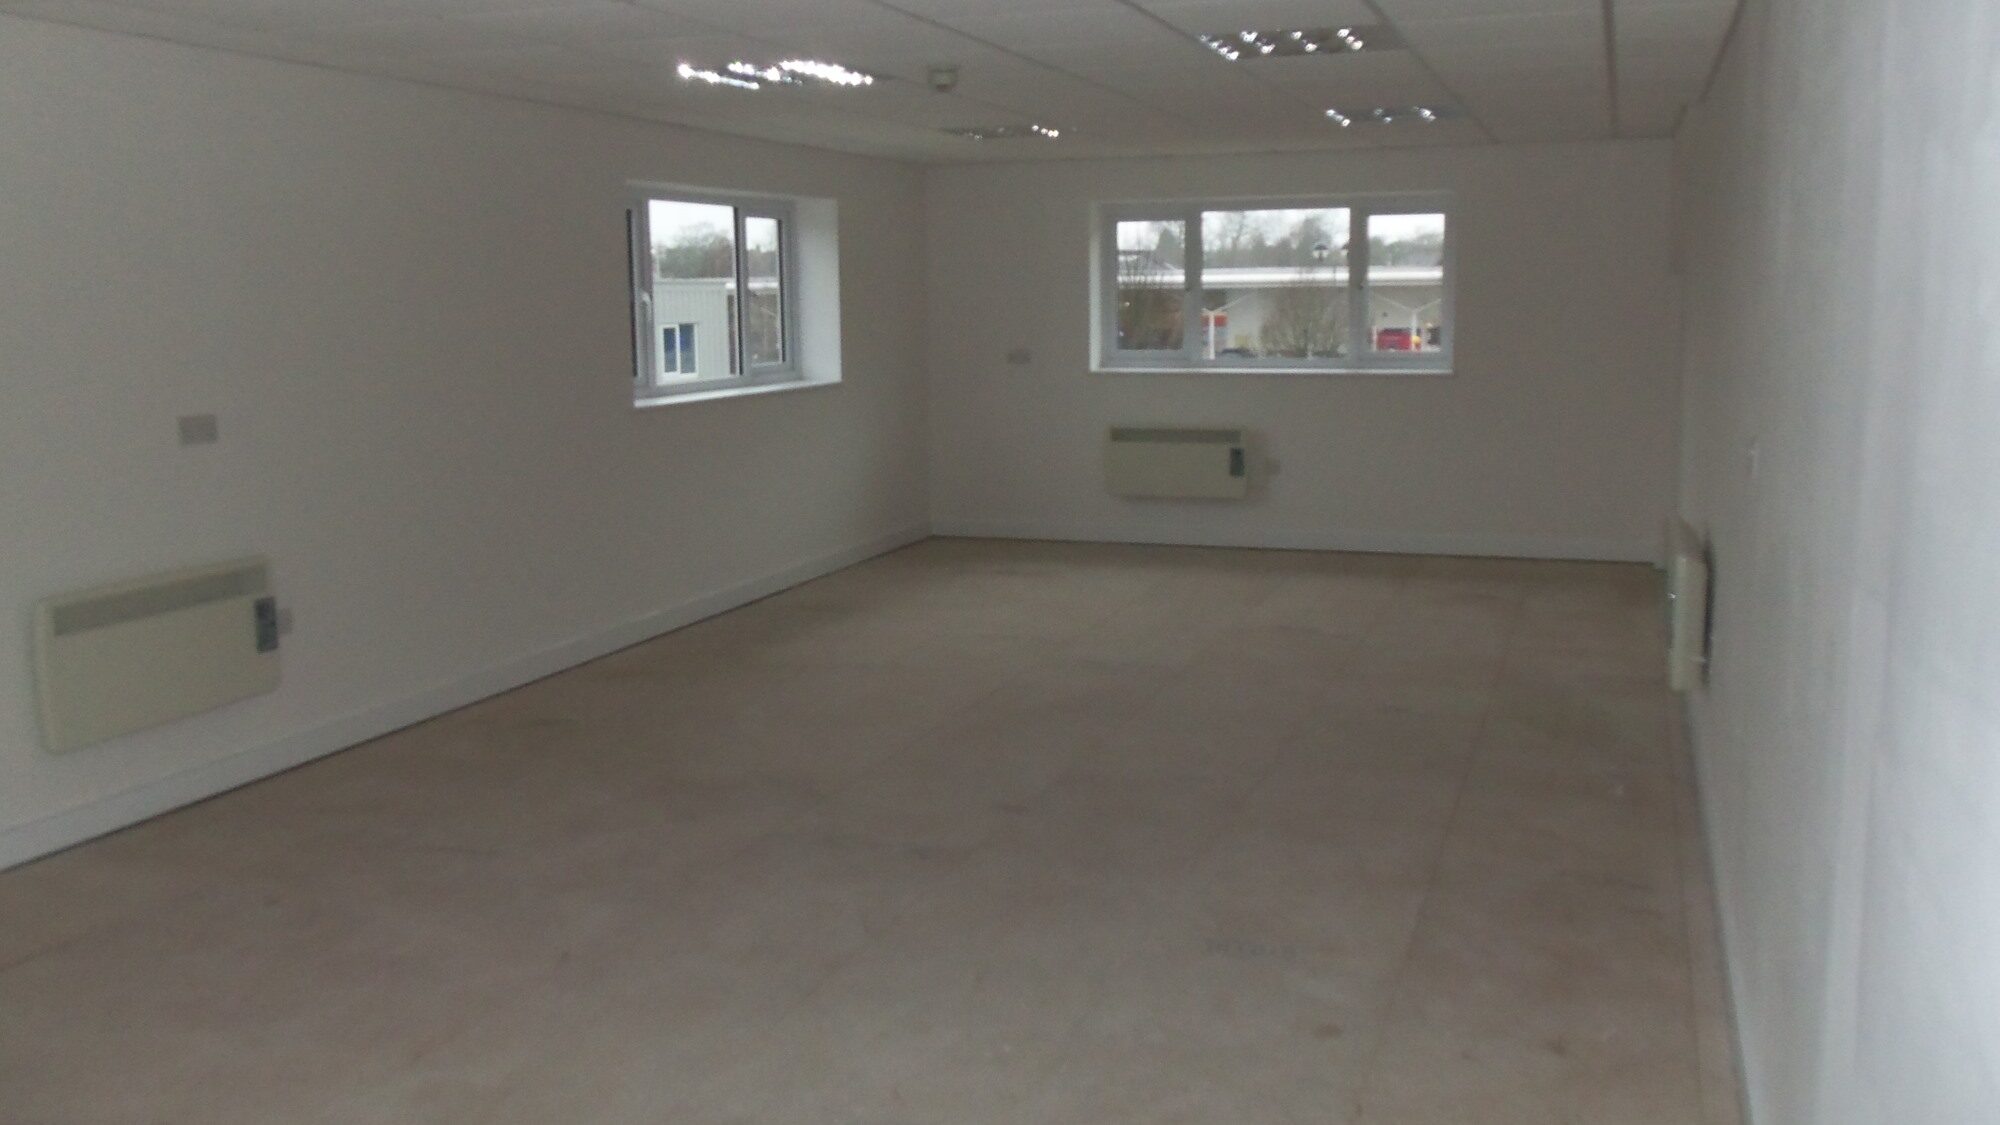 Kingscote D Office to Let Internal 1